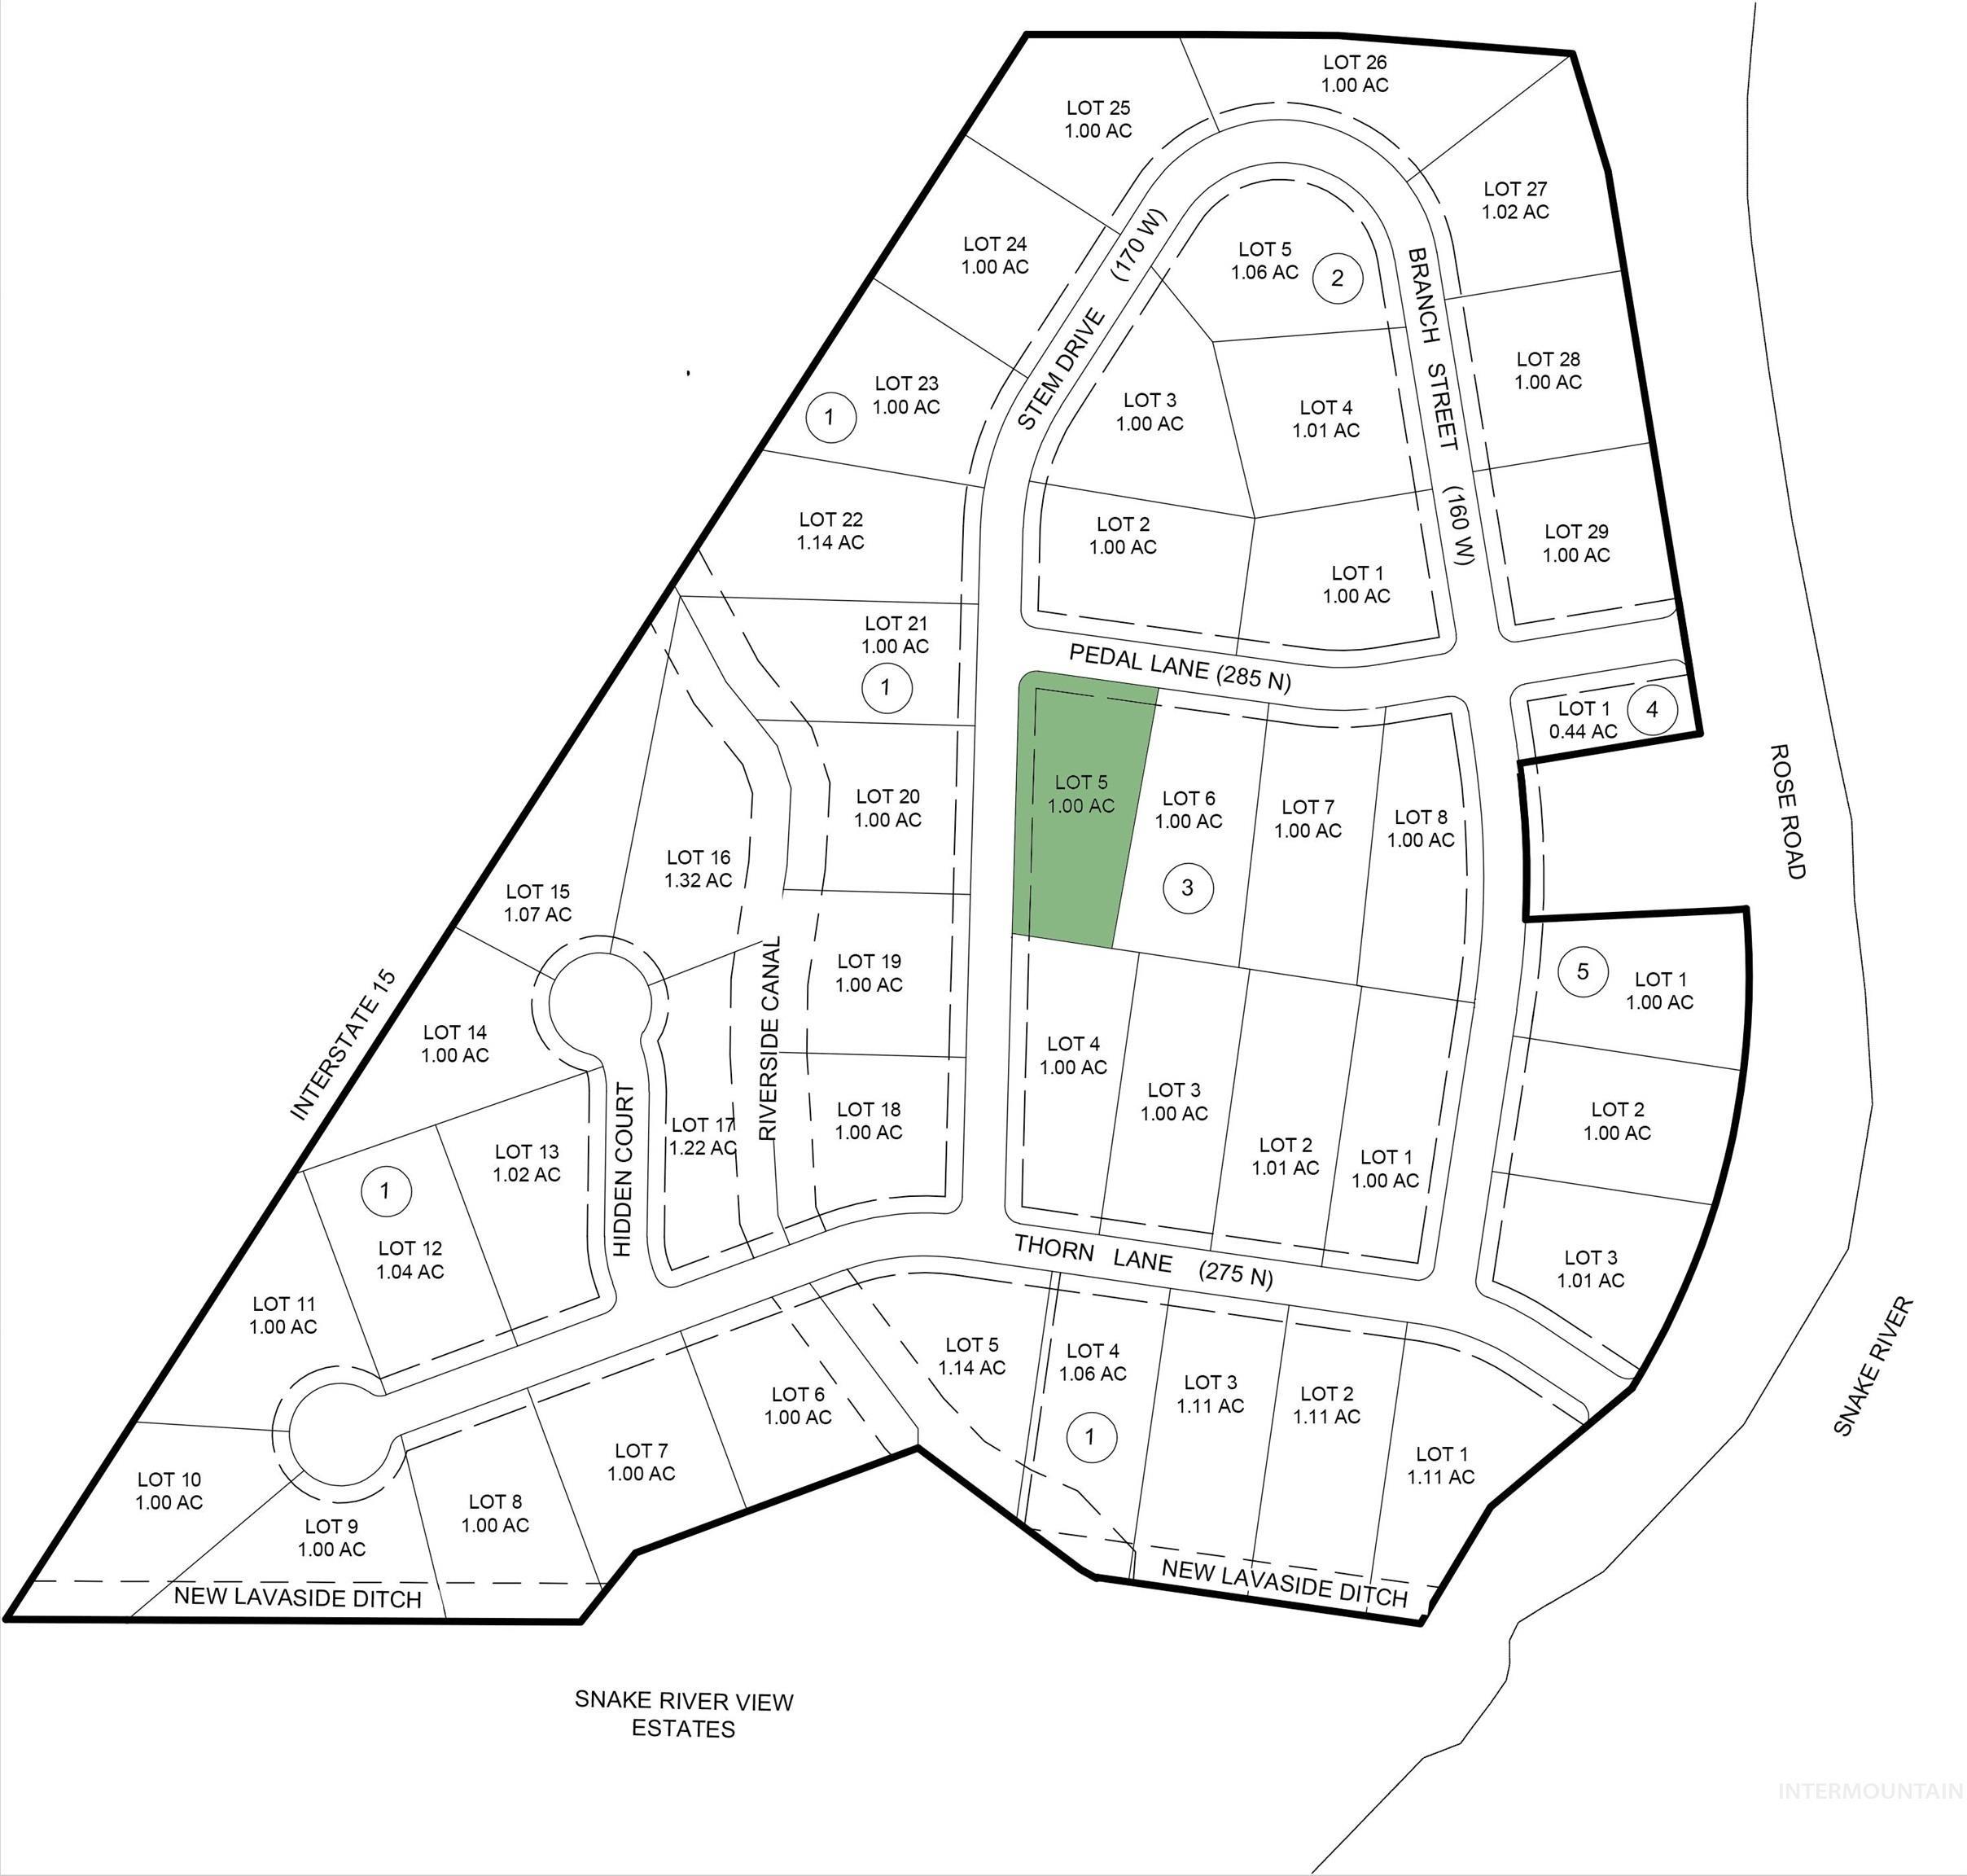 Property Image for Tbd Block 3 Lot 5